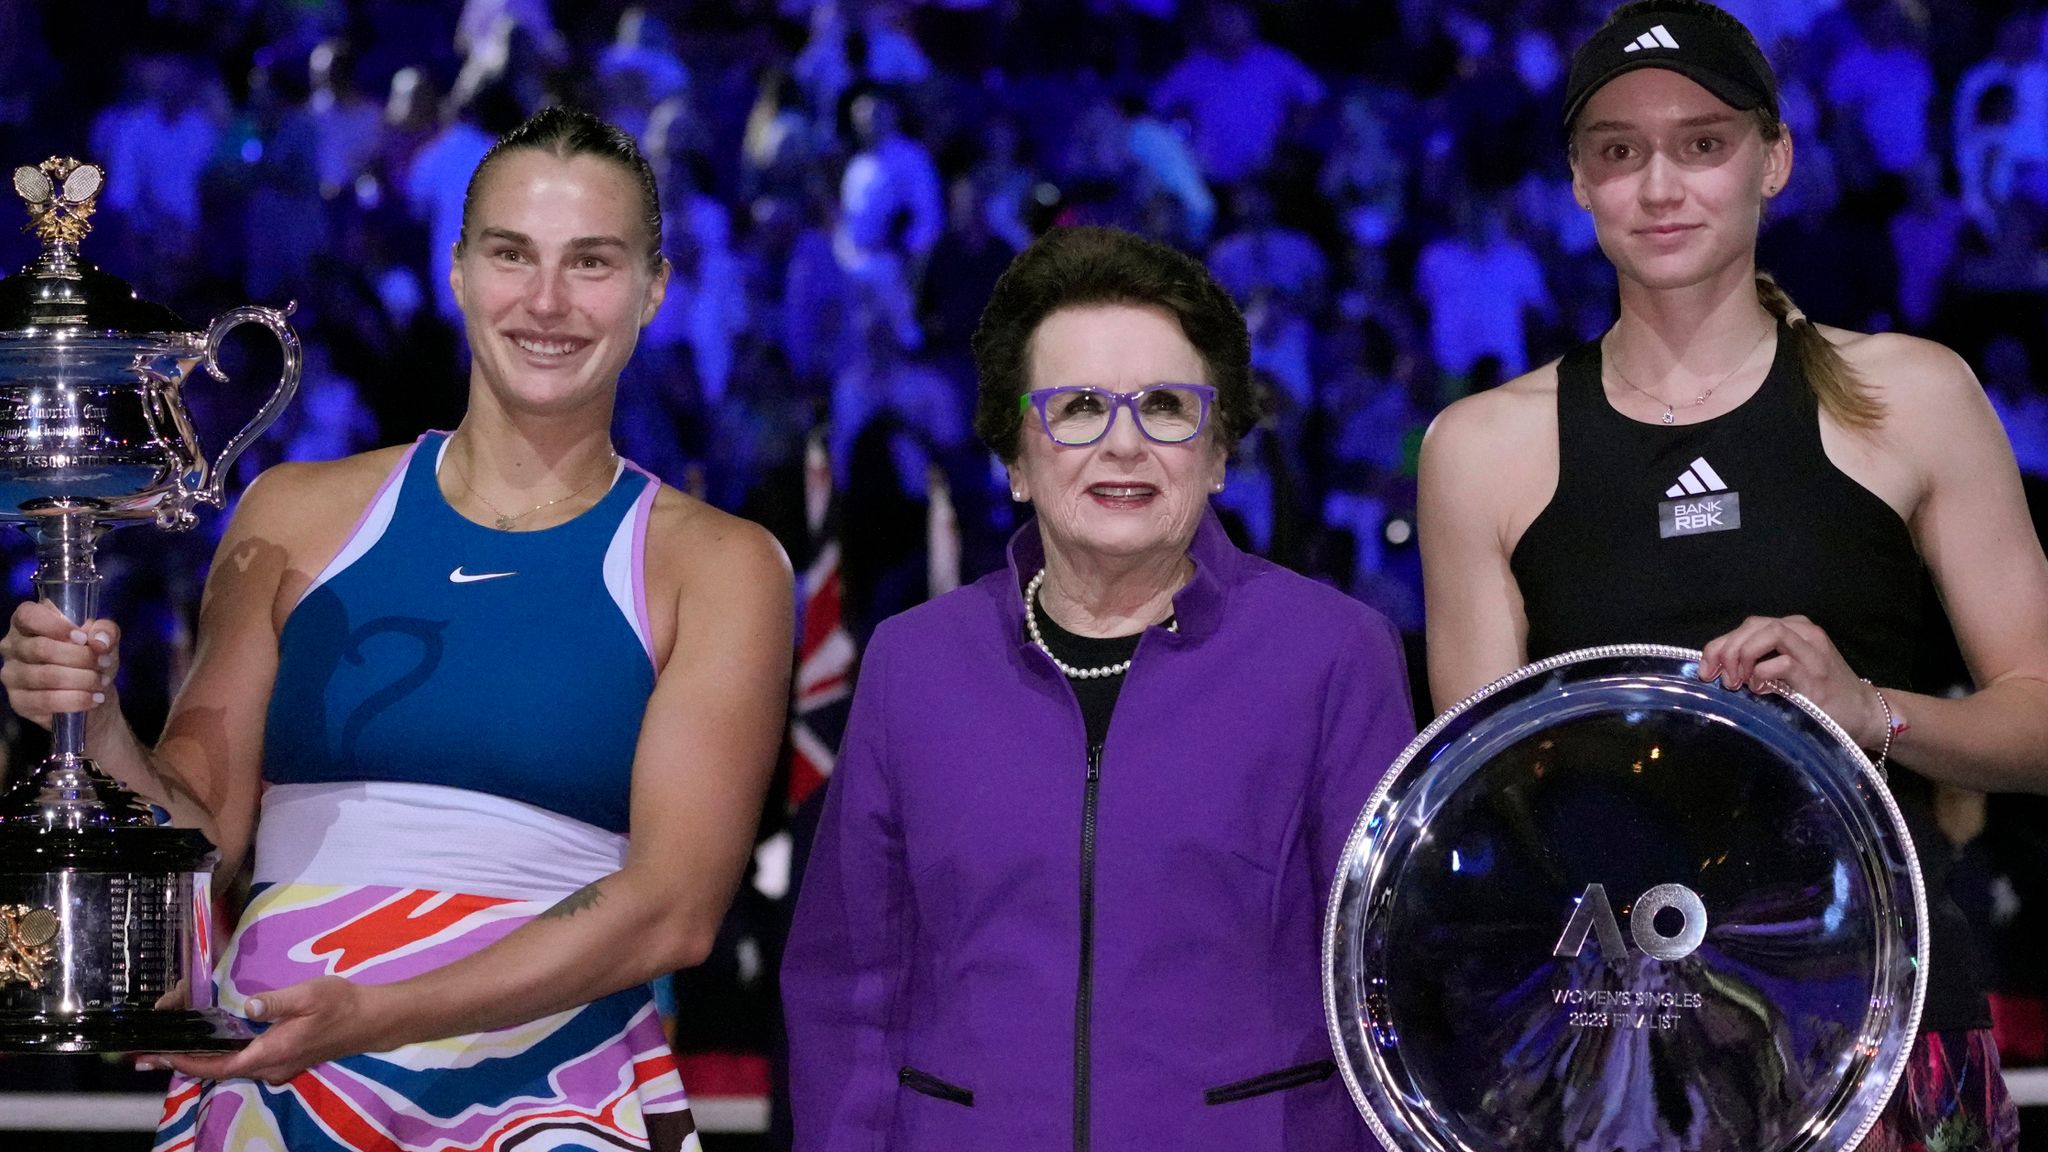 WTA commits to equal prize money at combined events by 2027 and  non-combined by 2033 - BBC Sport